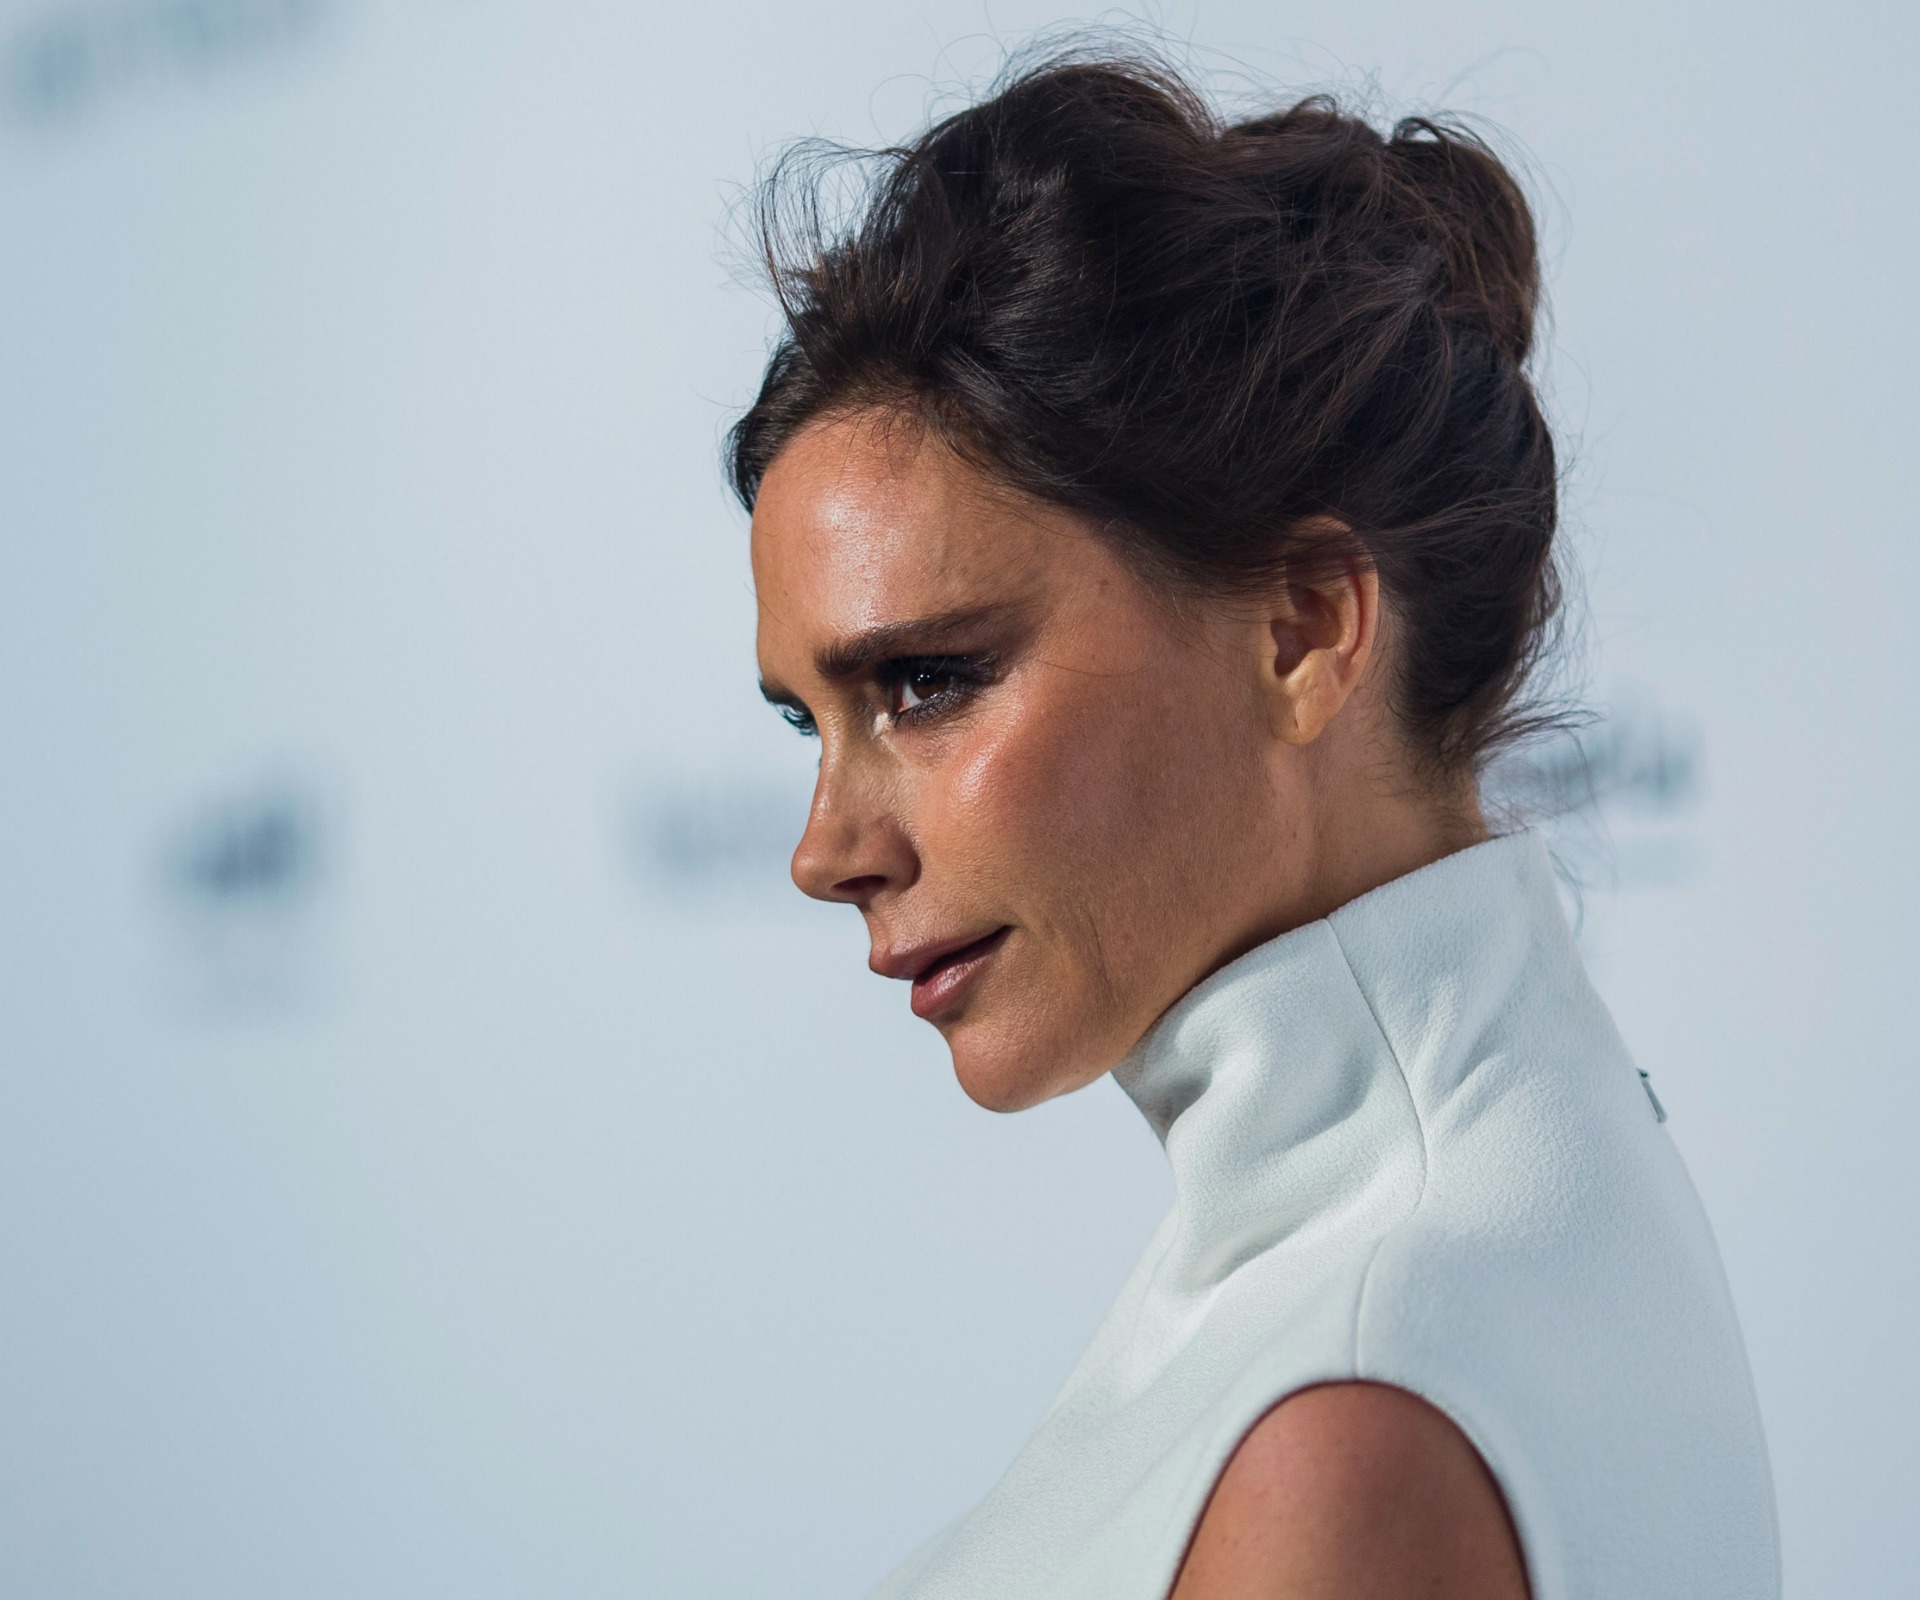 Victoria Beckham to receive OBE for her services to fashion and charity